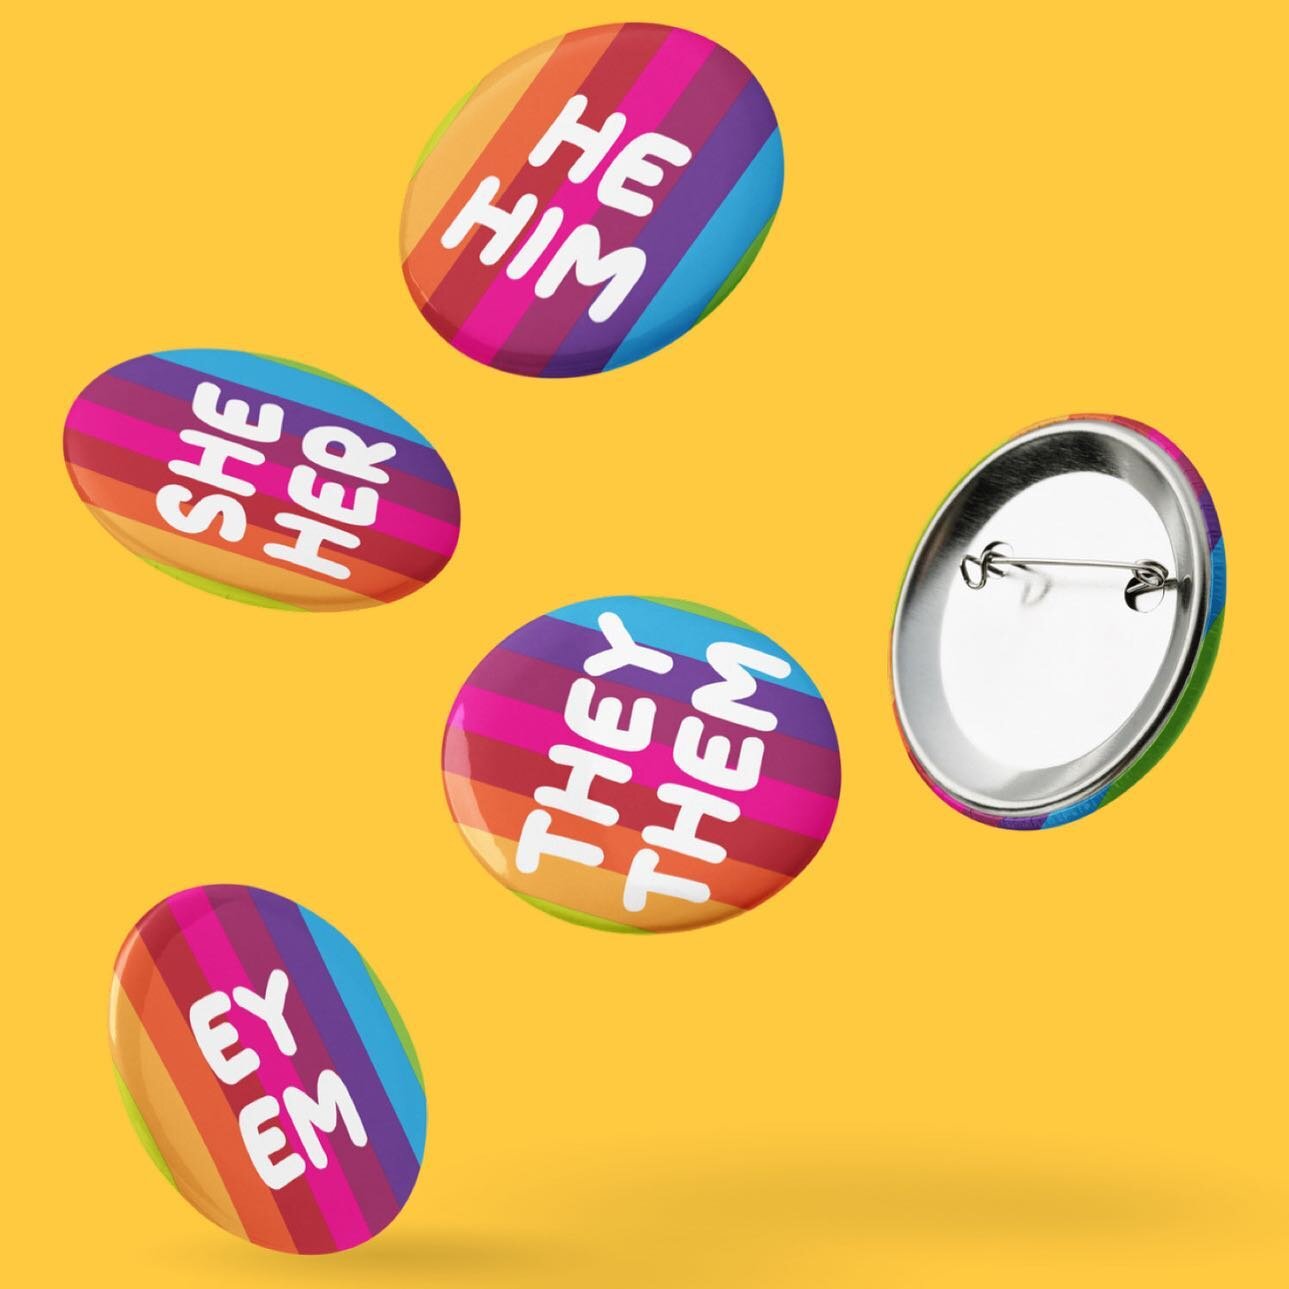 🌈 Pride is in full swing and we've got the pronoun buttons to prove it! 🎉 Whether you go by he/him, she/her, they/them, or something else entirely, we've got you covered. 😎 Wear your identity with pride this summer! ☀️ Grab our pronoun buttons and